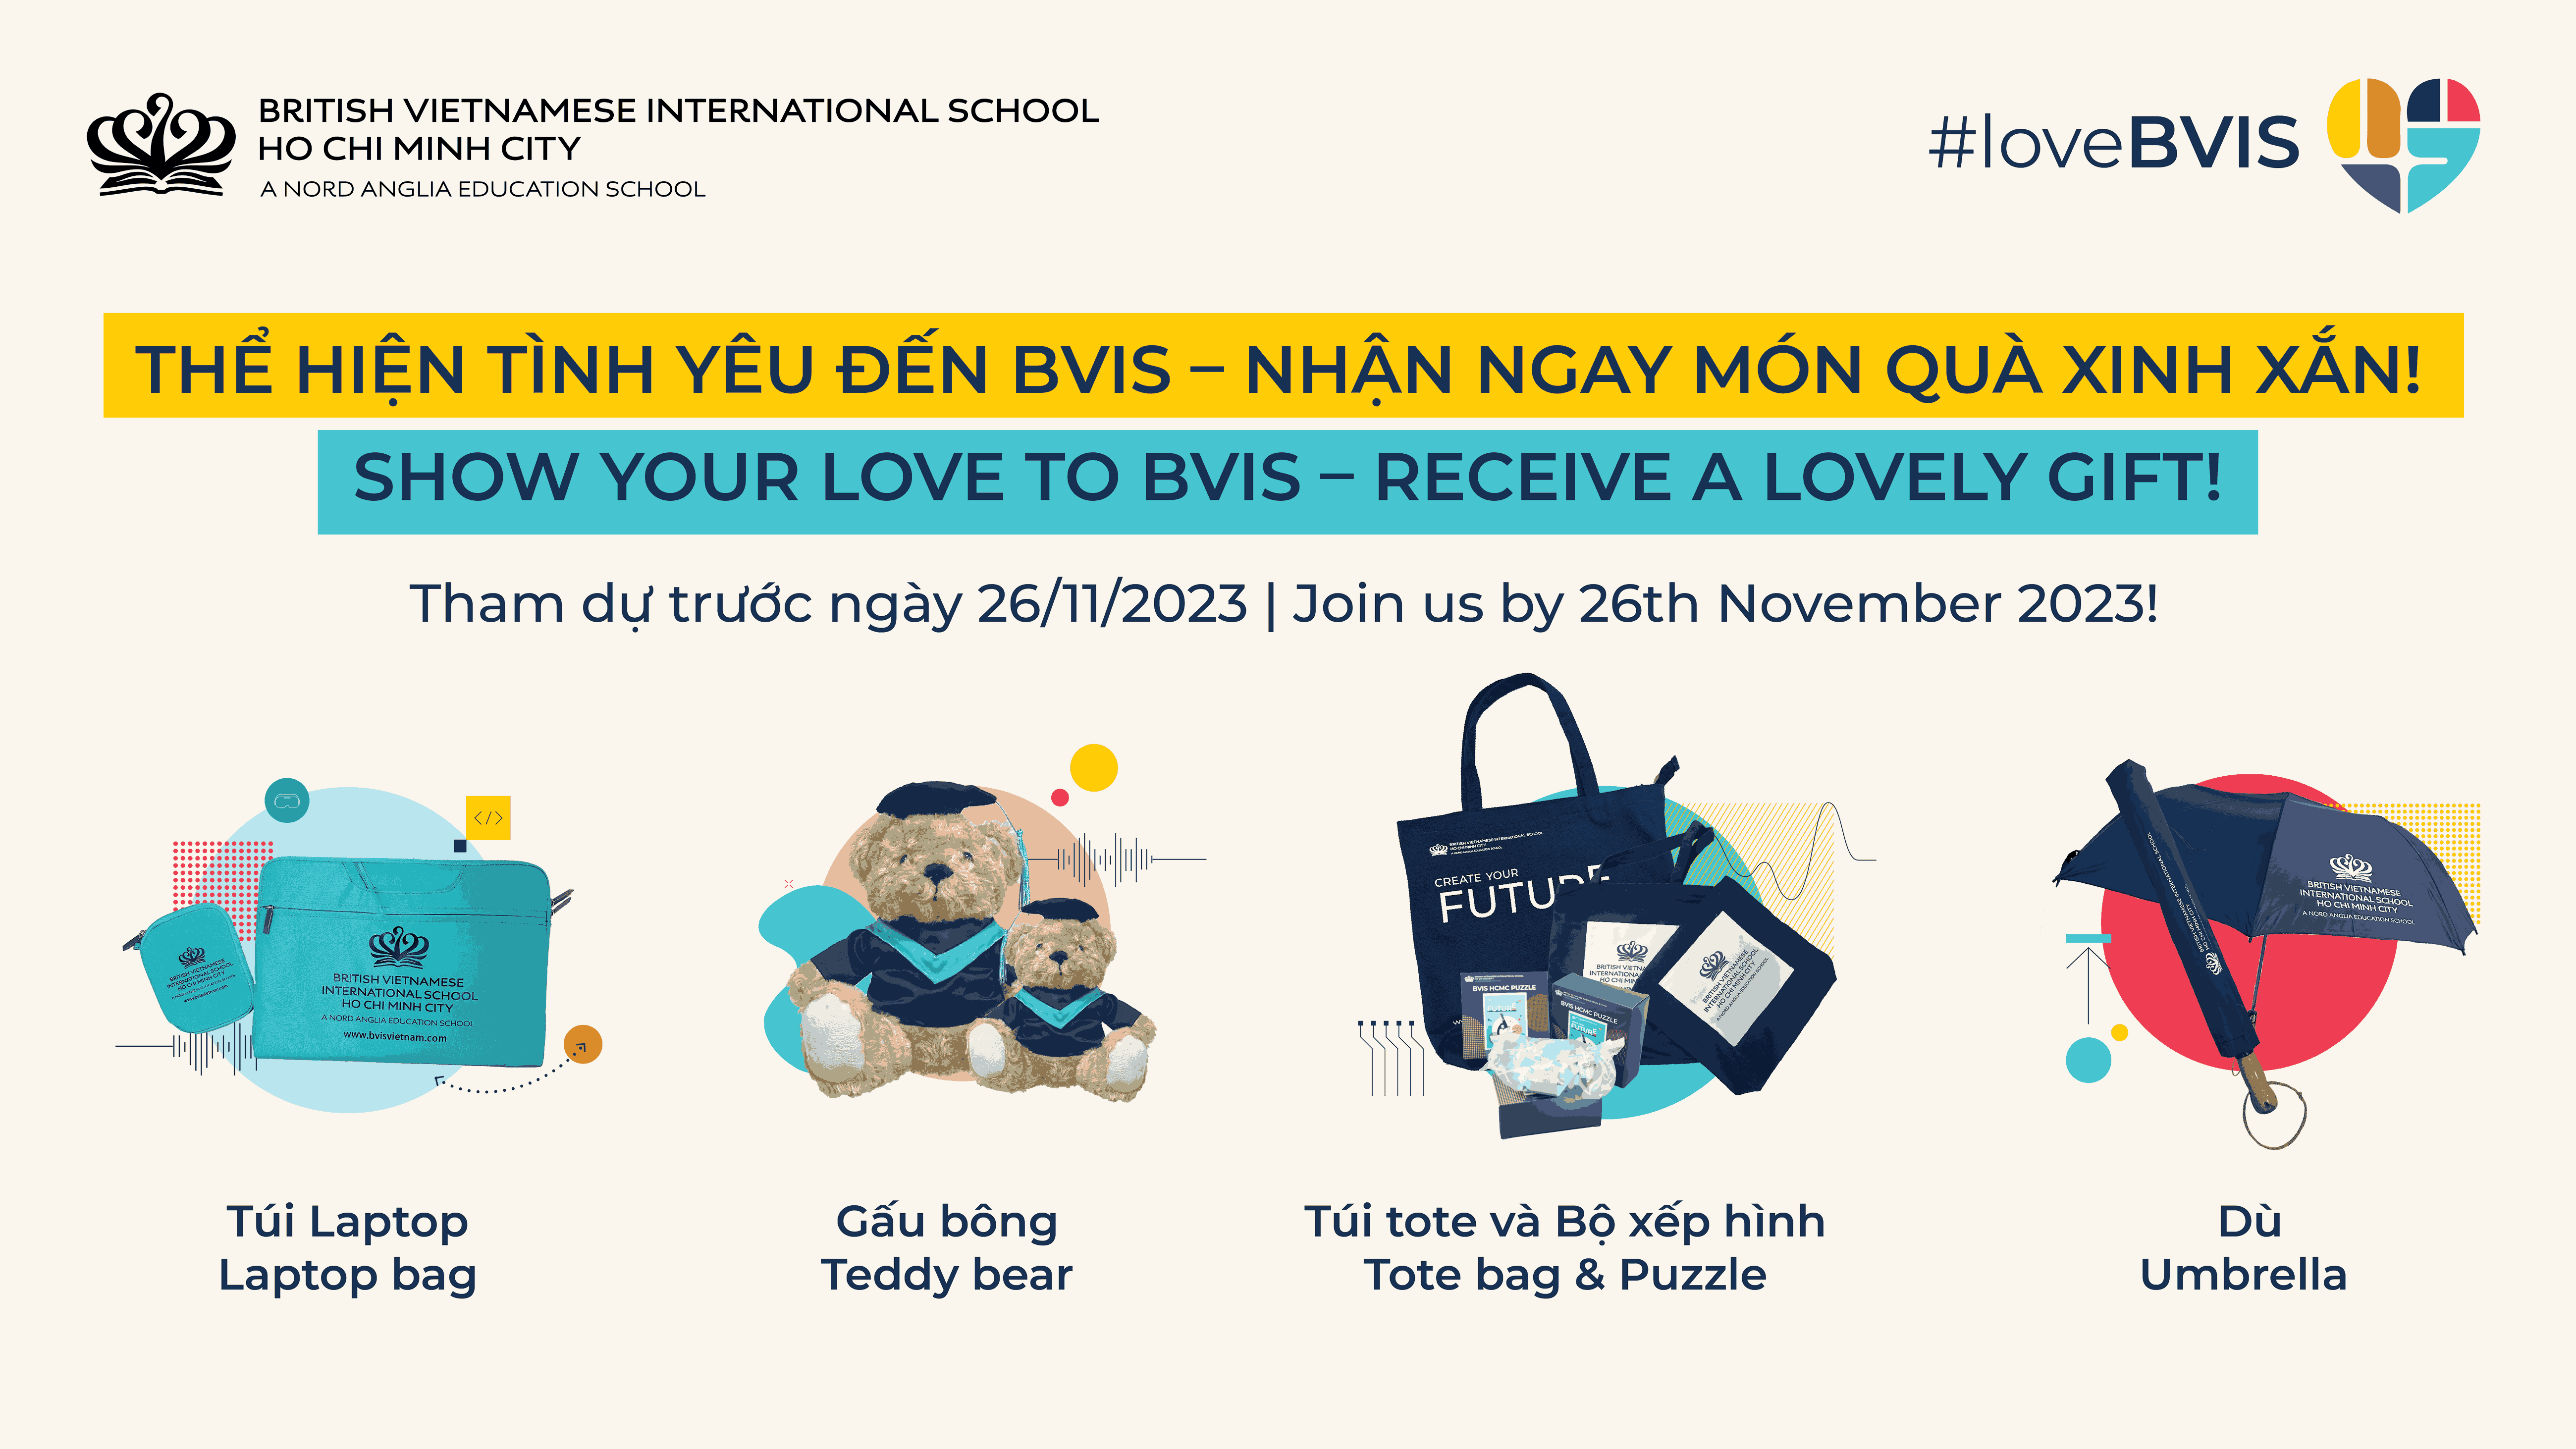 #LOVEBVIS2023 - SHOW YOUR LOVE TO BVIS TODAY!  - LOVEBVIS2023 SHOW YOUR LOVE TO BVIS TODAY